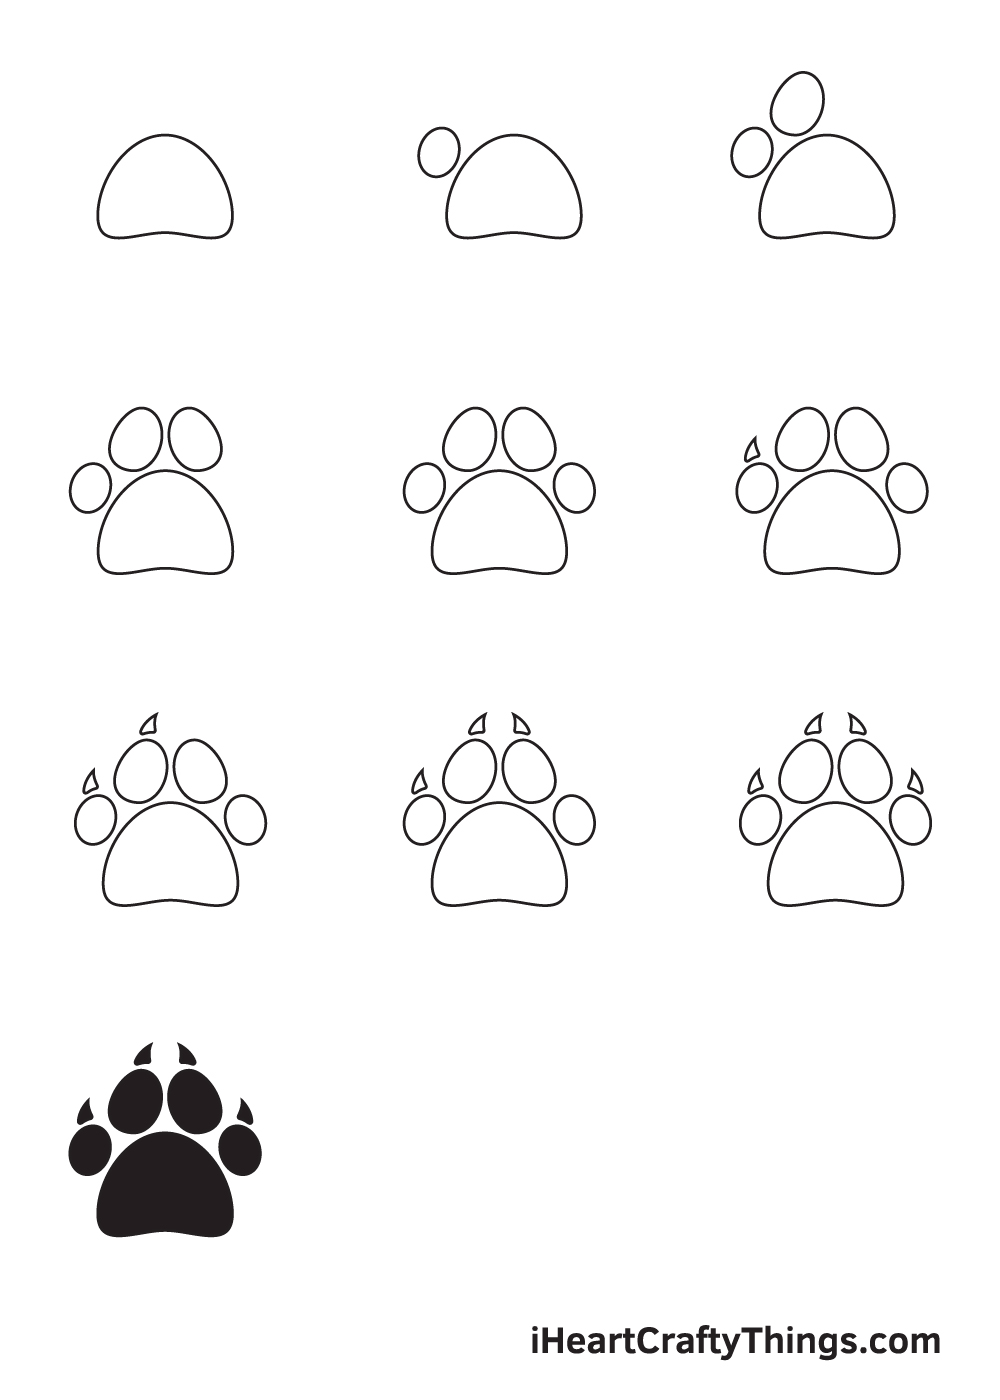 How to Draw a Paw Print – Step by Step Guide